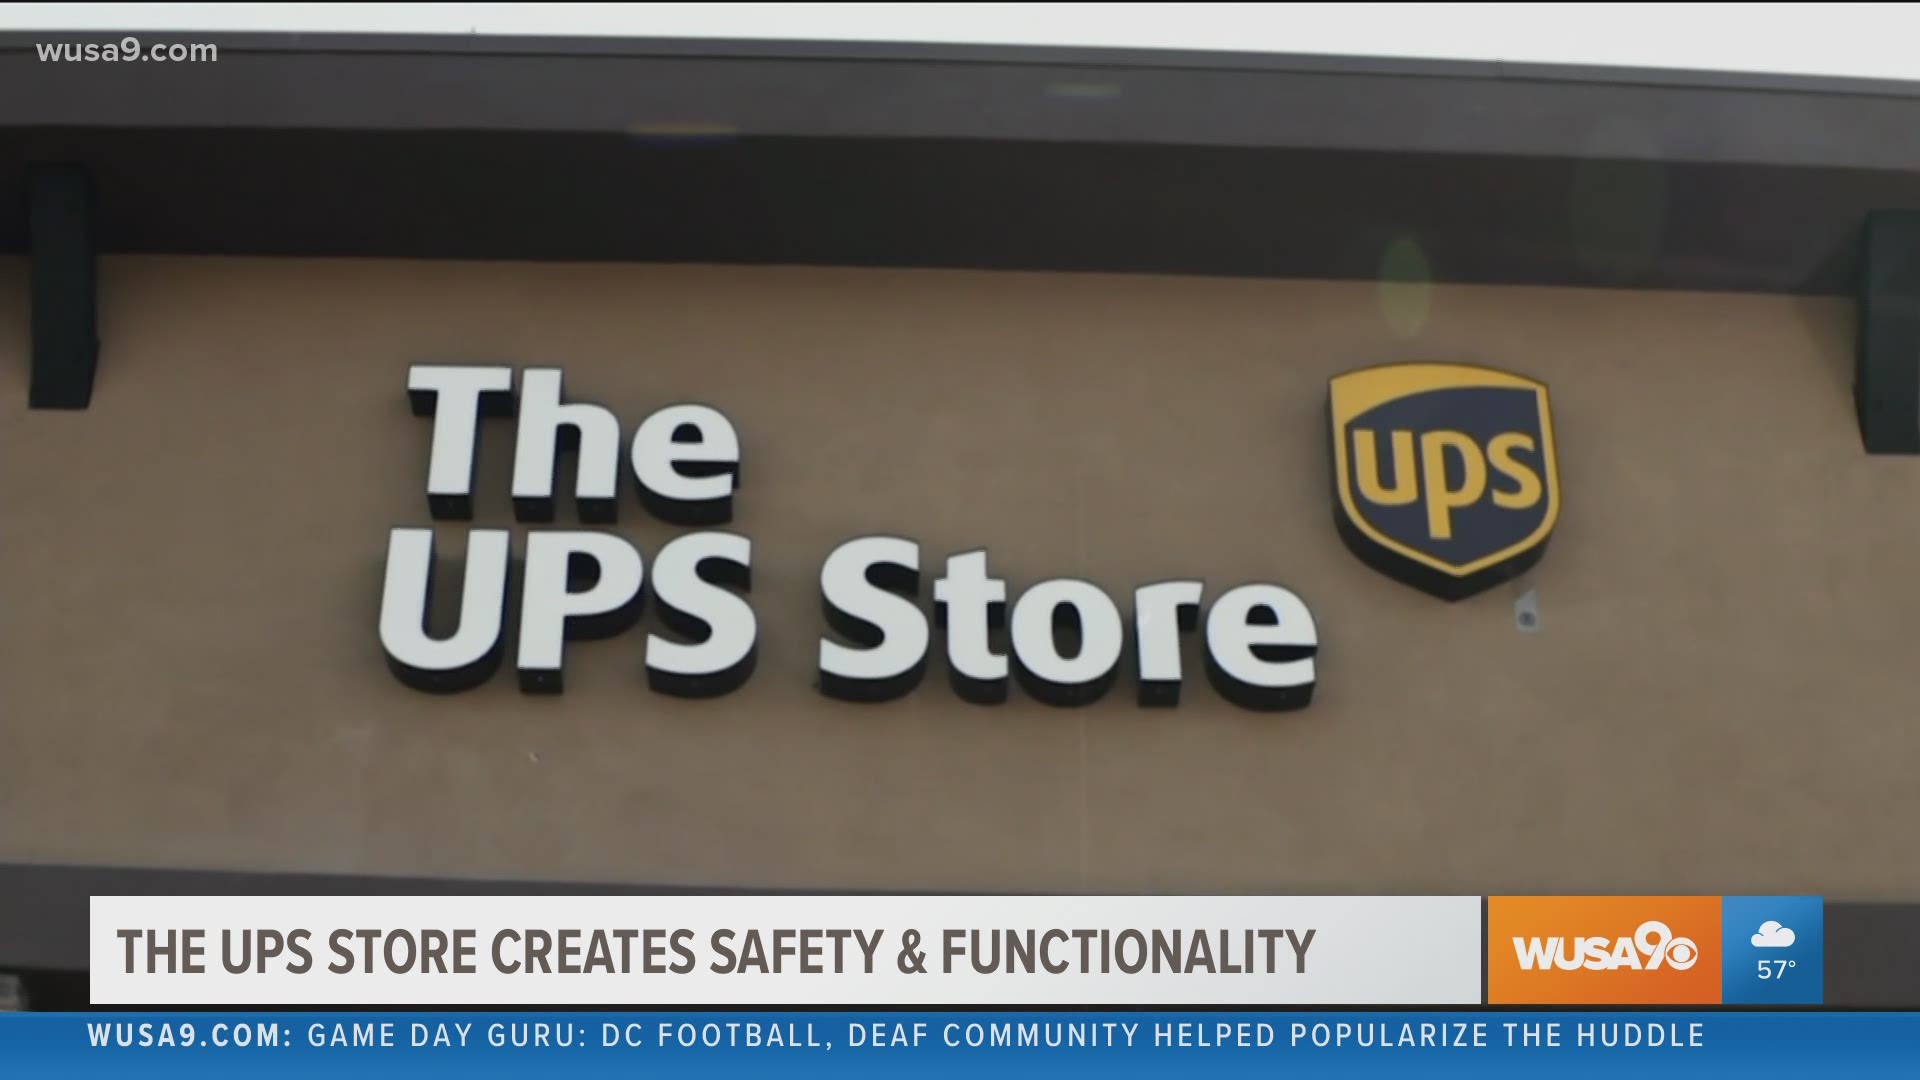 Sponsored by The UPS Store. Visit www.theupsstorefranchise.com/new-store-design for more information.